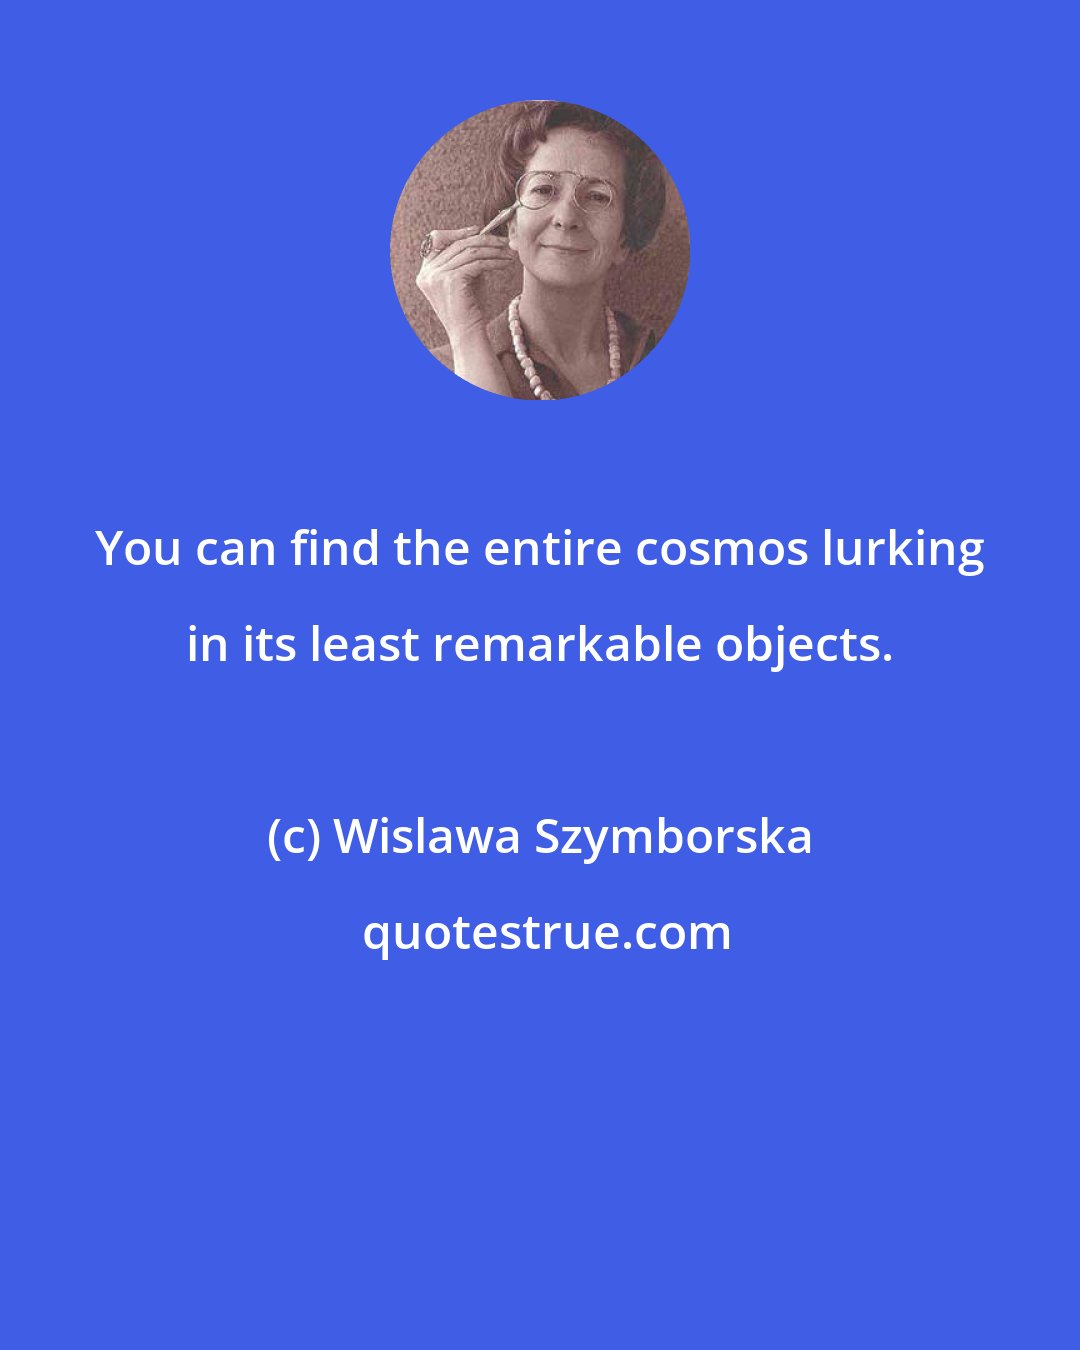 Wislawa Szymborska: You can find the entire cosmos lurking in its least remarkable objects.